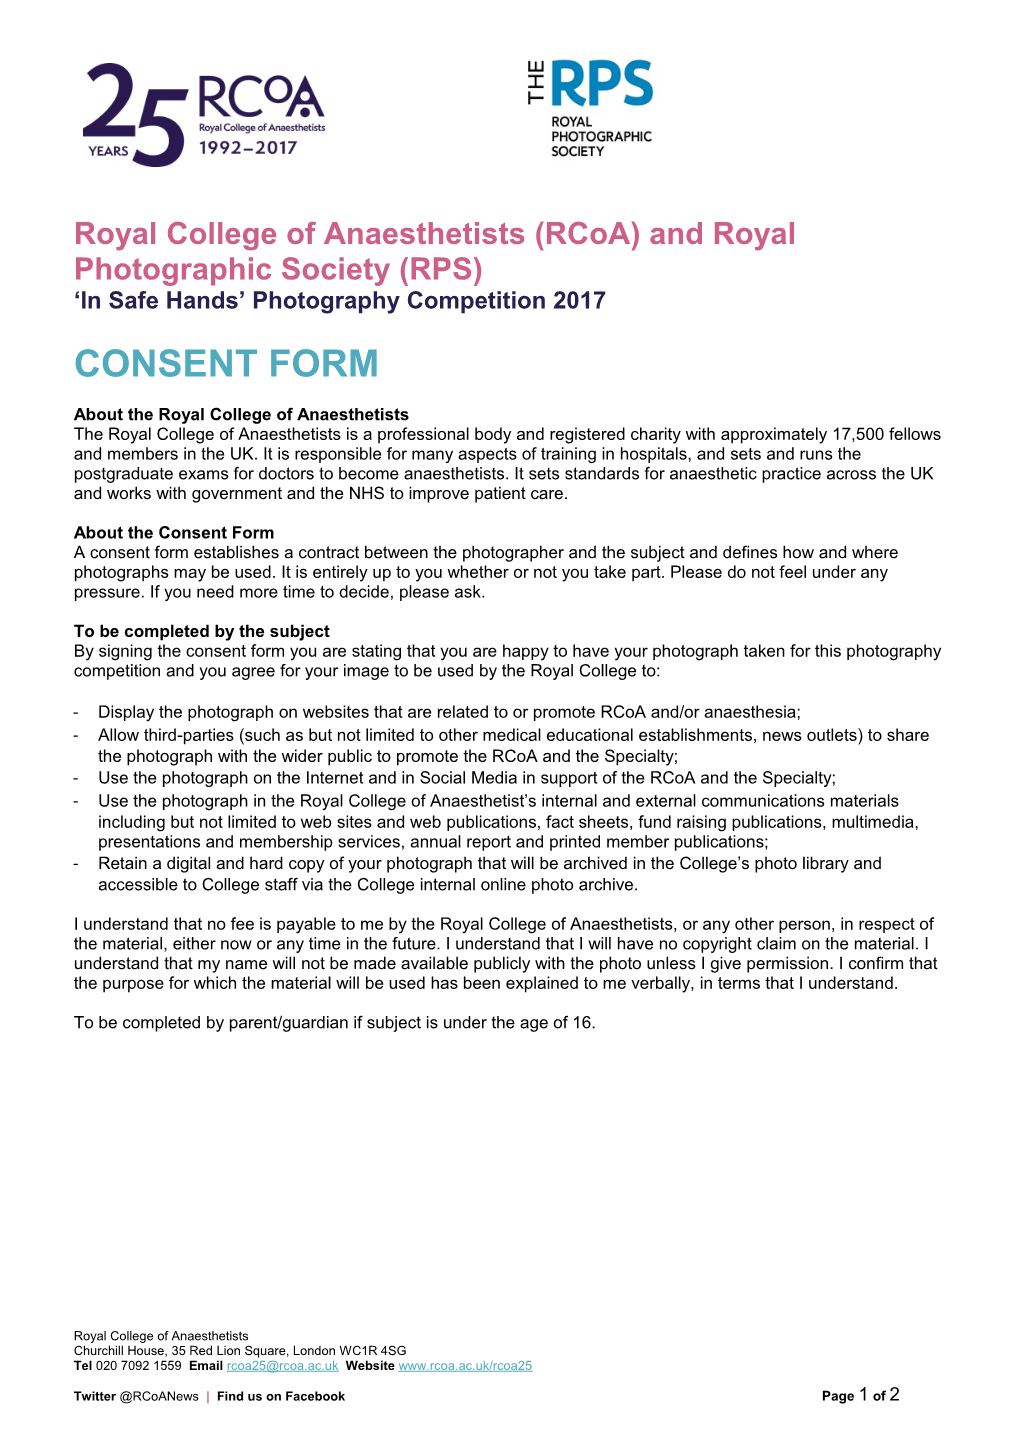 Royal College of Anaesthetists (Rcoa) and Royal Photographic Society (RPS)